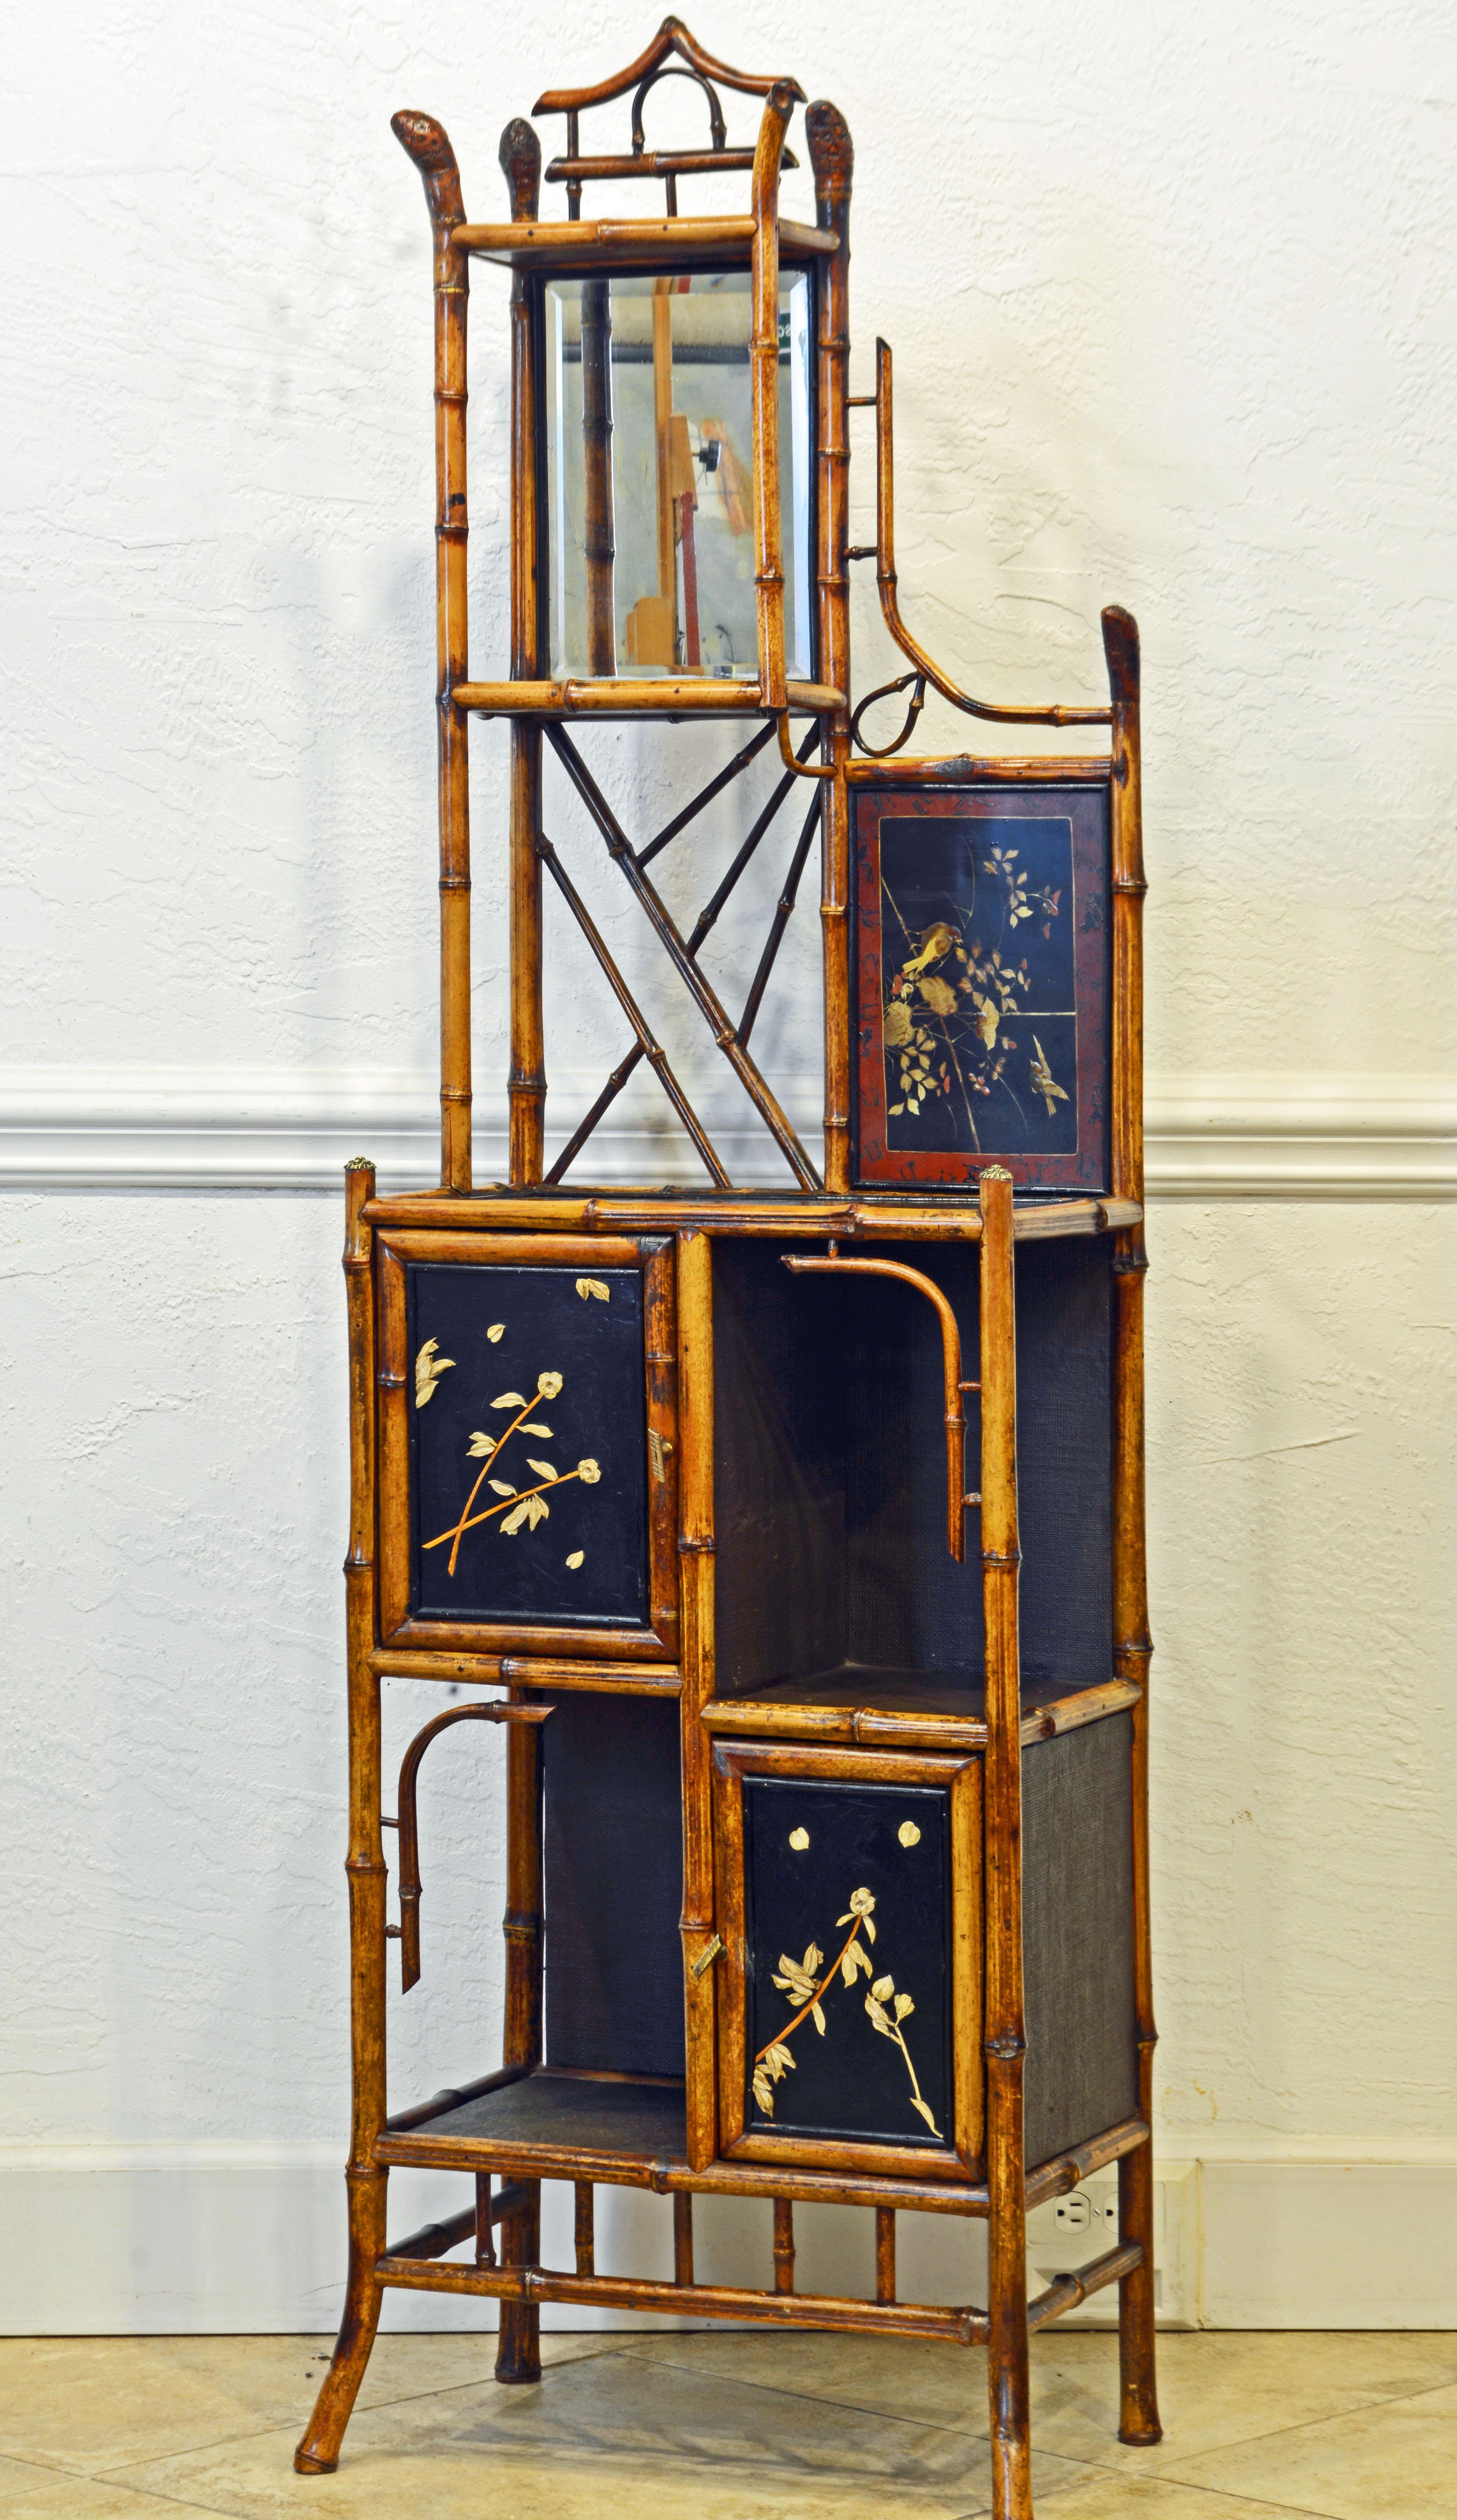 This artful English bamboo and decorated lacquer cabinet étagère combines traditional chinoiserie style with the trends of the late 19th century new ideas of the Aesthetic Movement. It consists of a bamboo framework offering cabinets with decorated